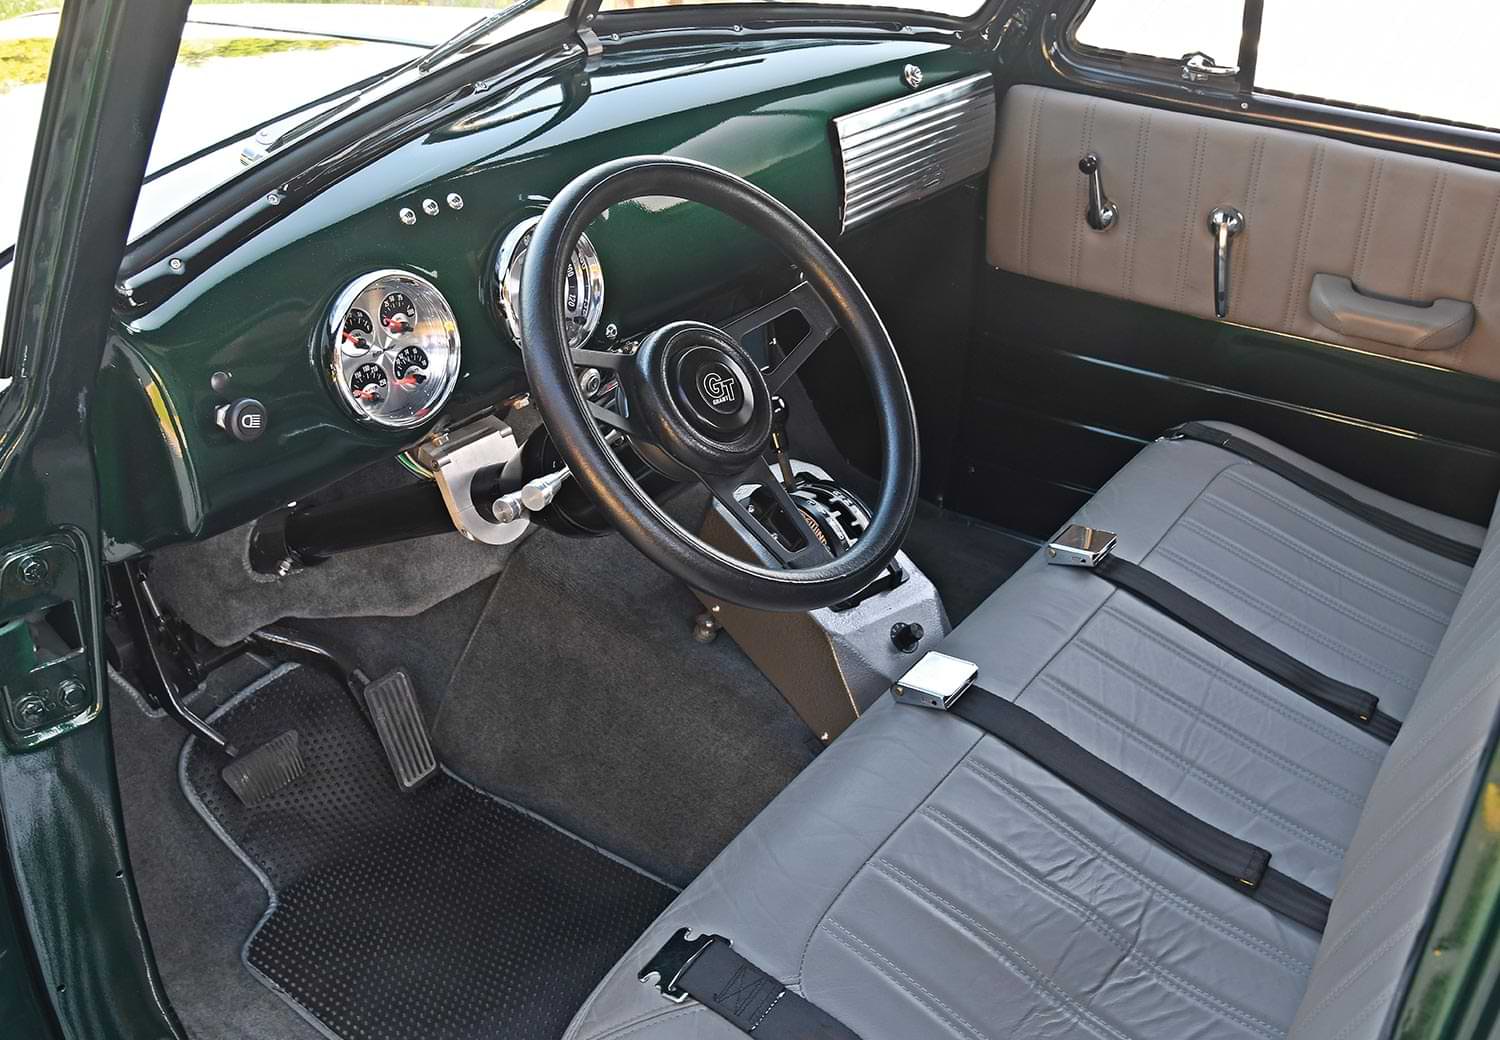 drivers side interior view of the Chevy 3100